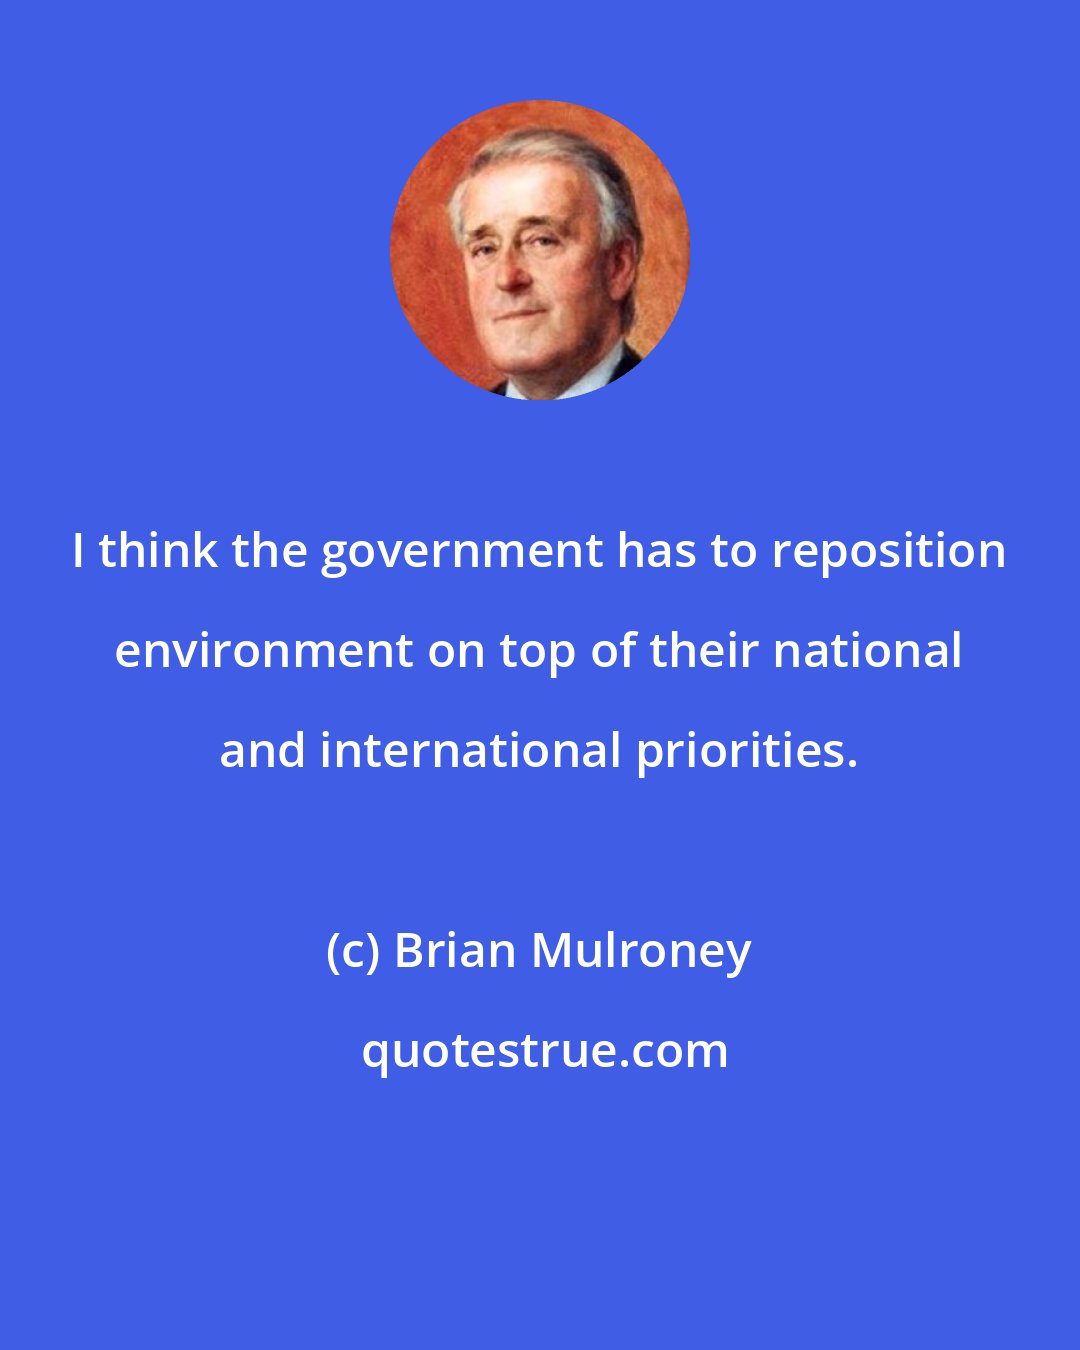 Brian Mulroney: I think the government has to reposition environment on top of their national and international priorities.